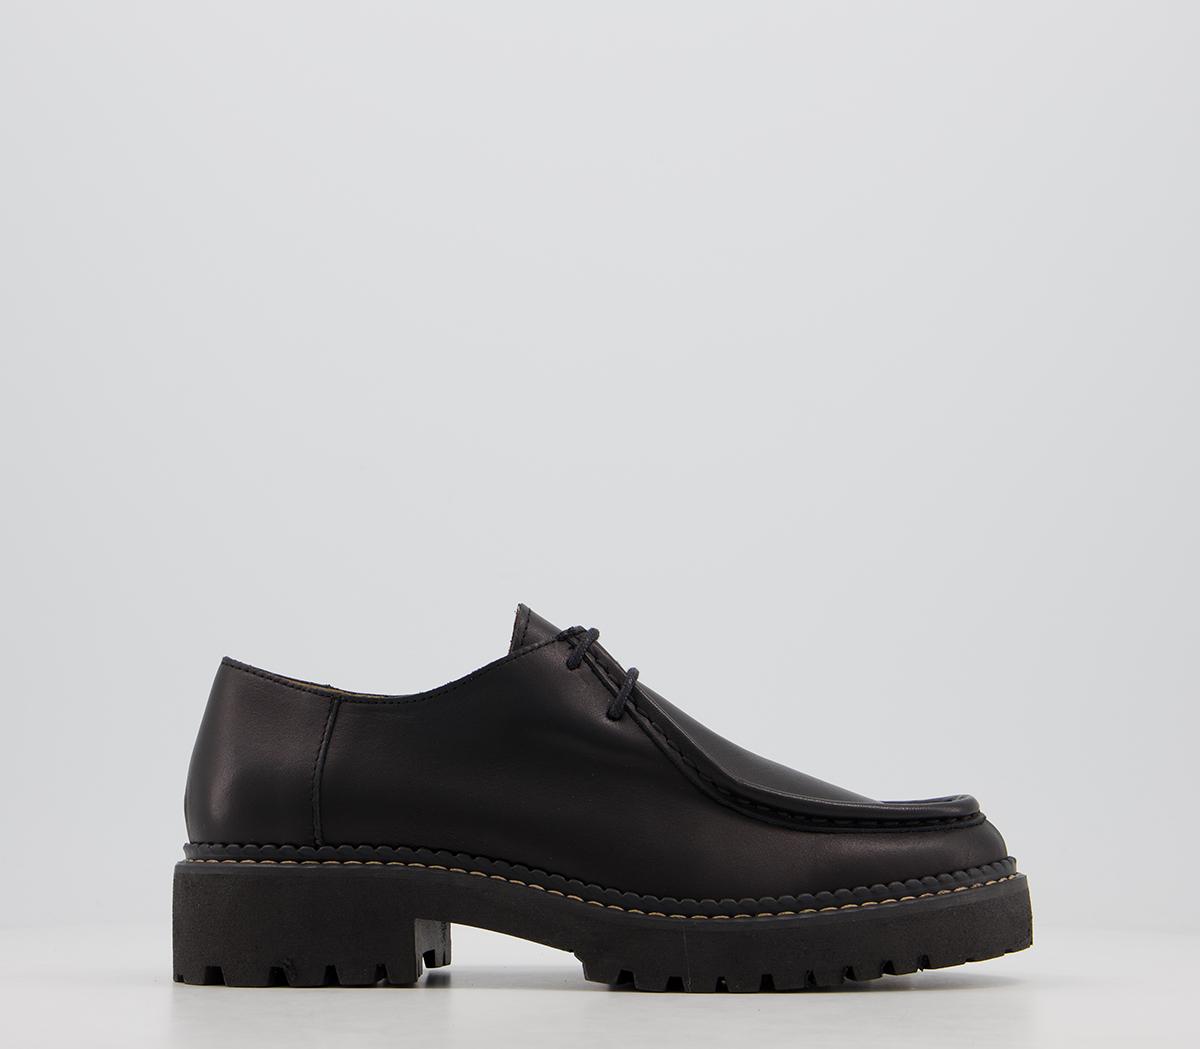 OFFICEFusion Chunky Cleated Lace Up FlatsBlack Leather